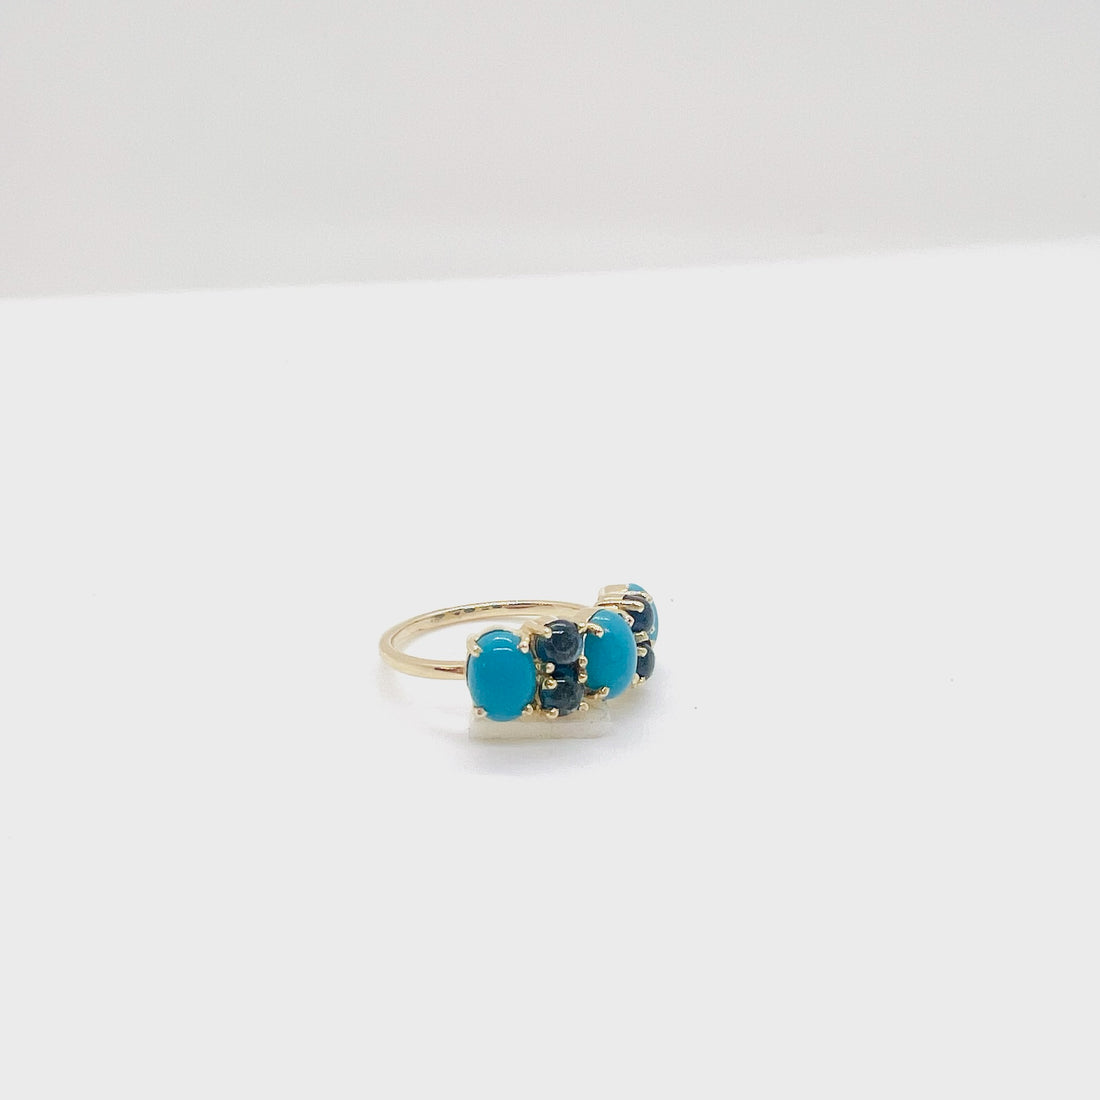 14k gold, turquoise and blue sapphire ring